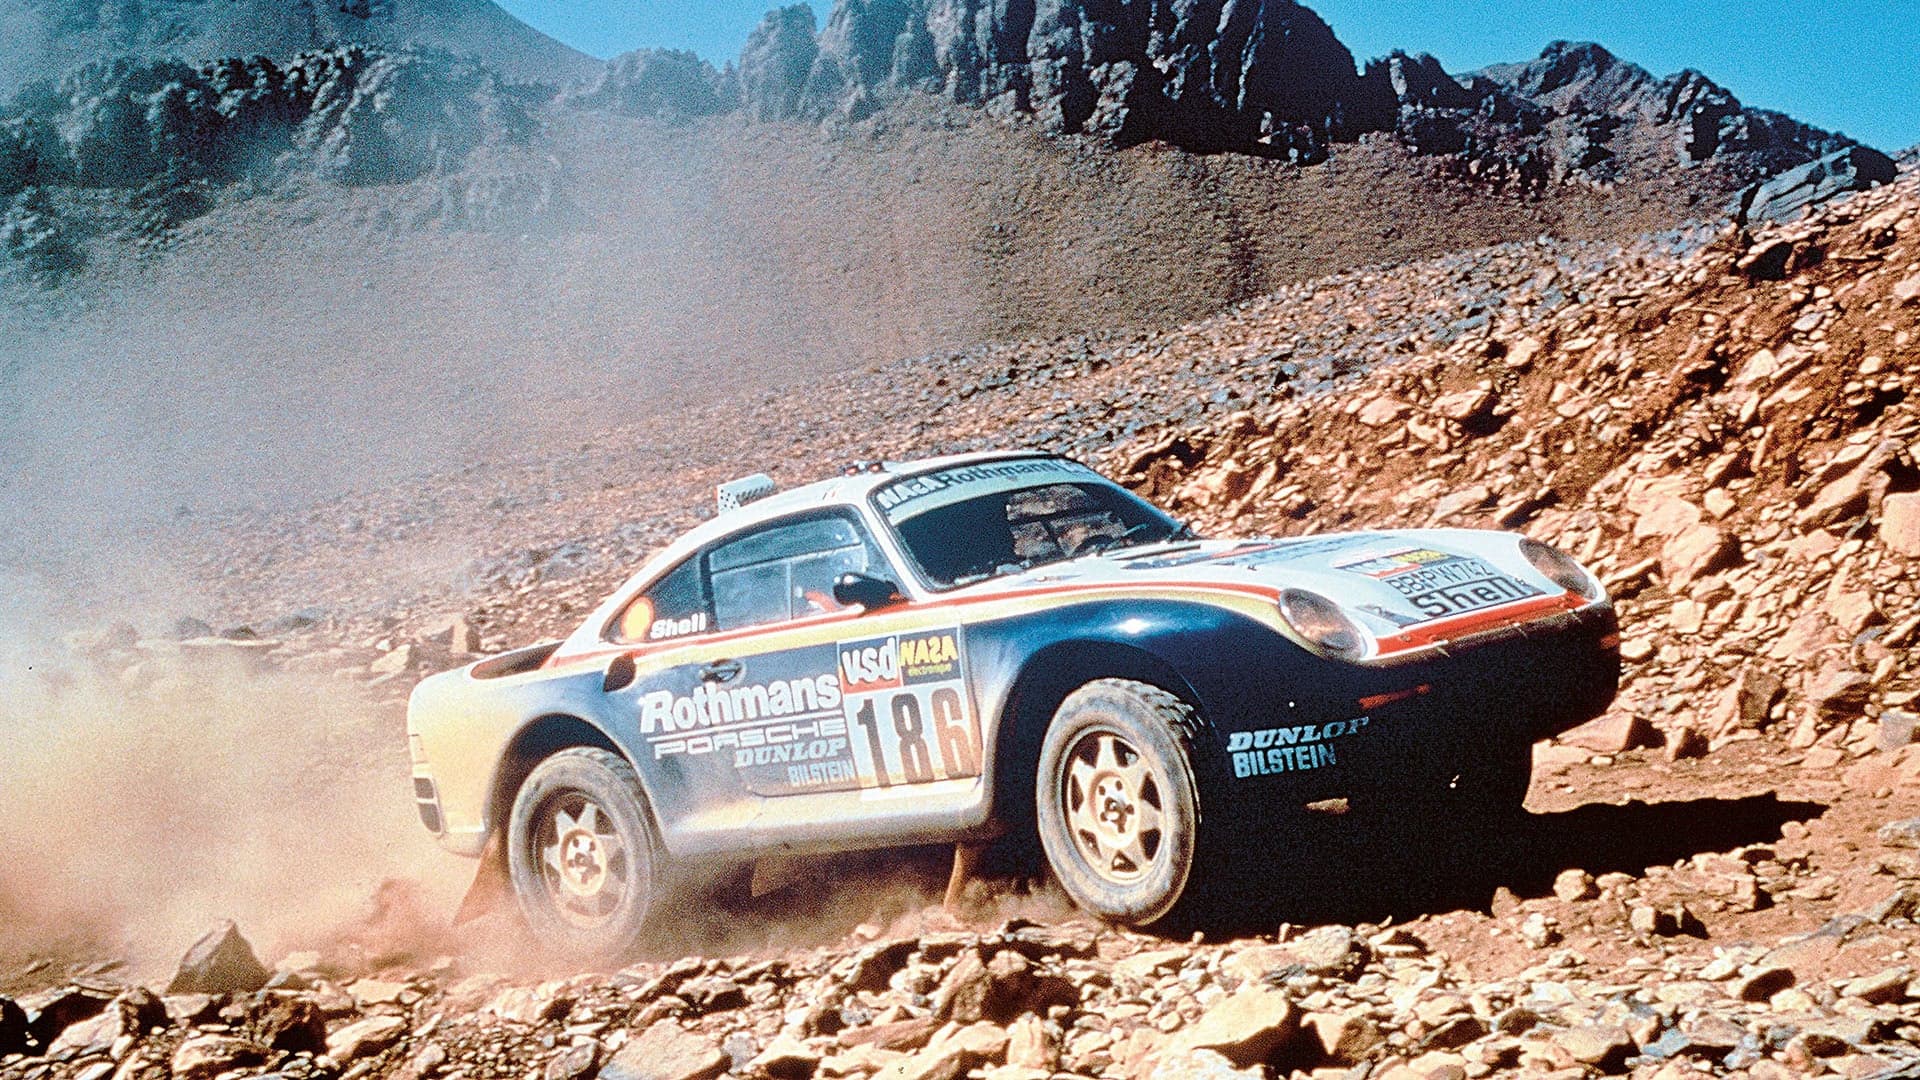 Behold the Porsche 959 Family That Dominated the Dakar Rally